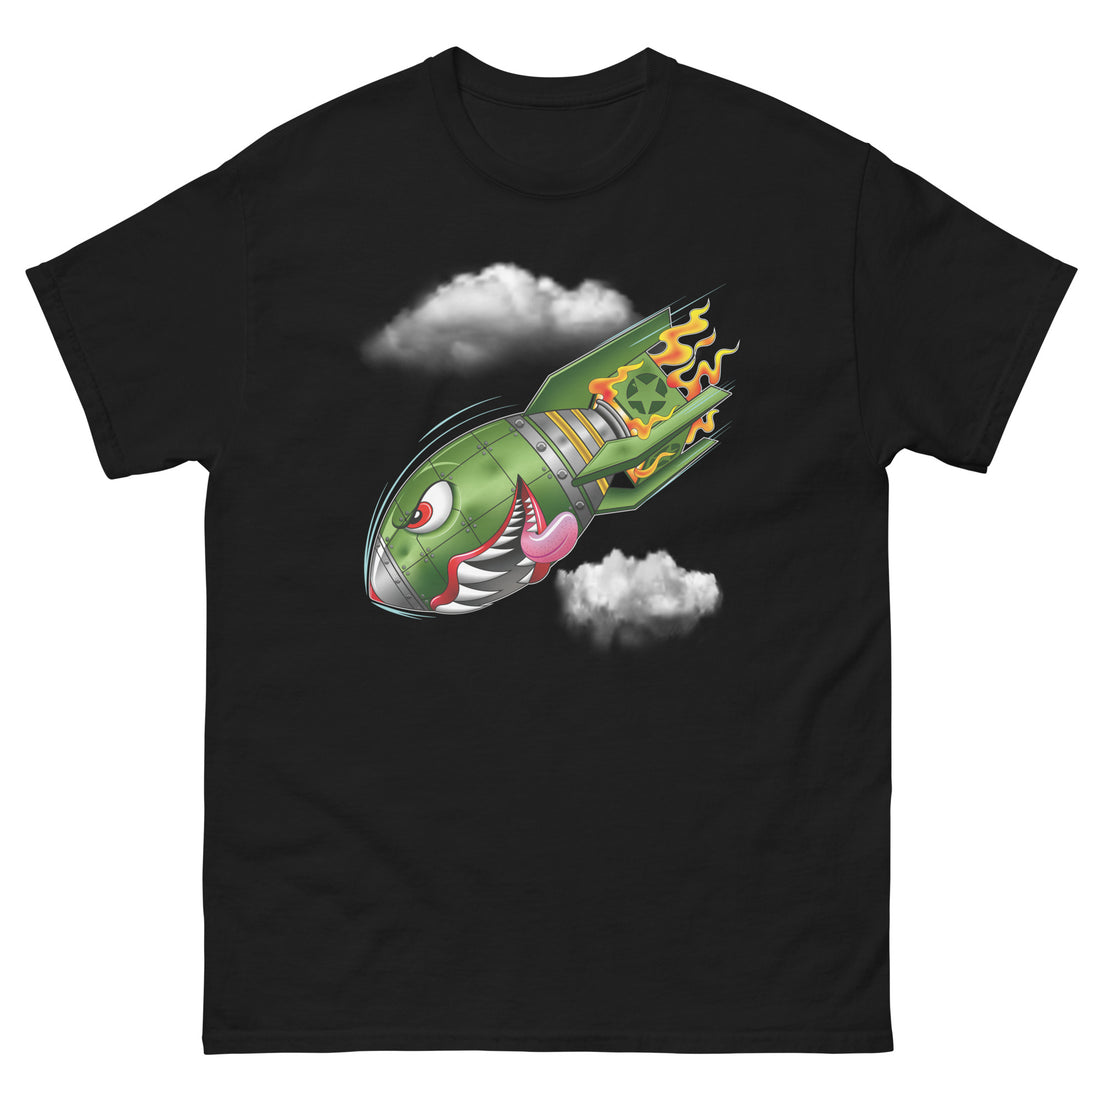 A black t-shirt with a military green neo-traditional bomb tattoo design. The bomb is falling with a look of determination in its eyes, an evil toothy grin, and its tongue hanging out of its mouth. Flames are coming from the back of the bomb, and some clouds are in the background.